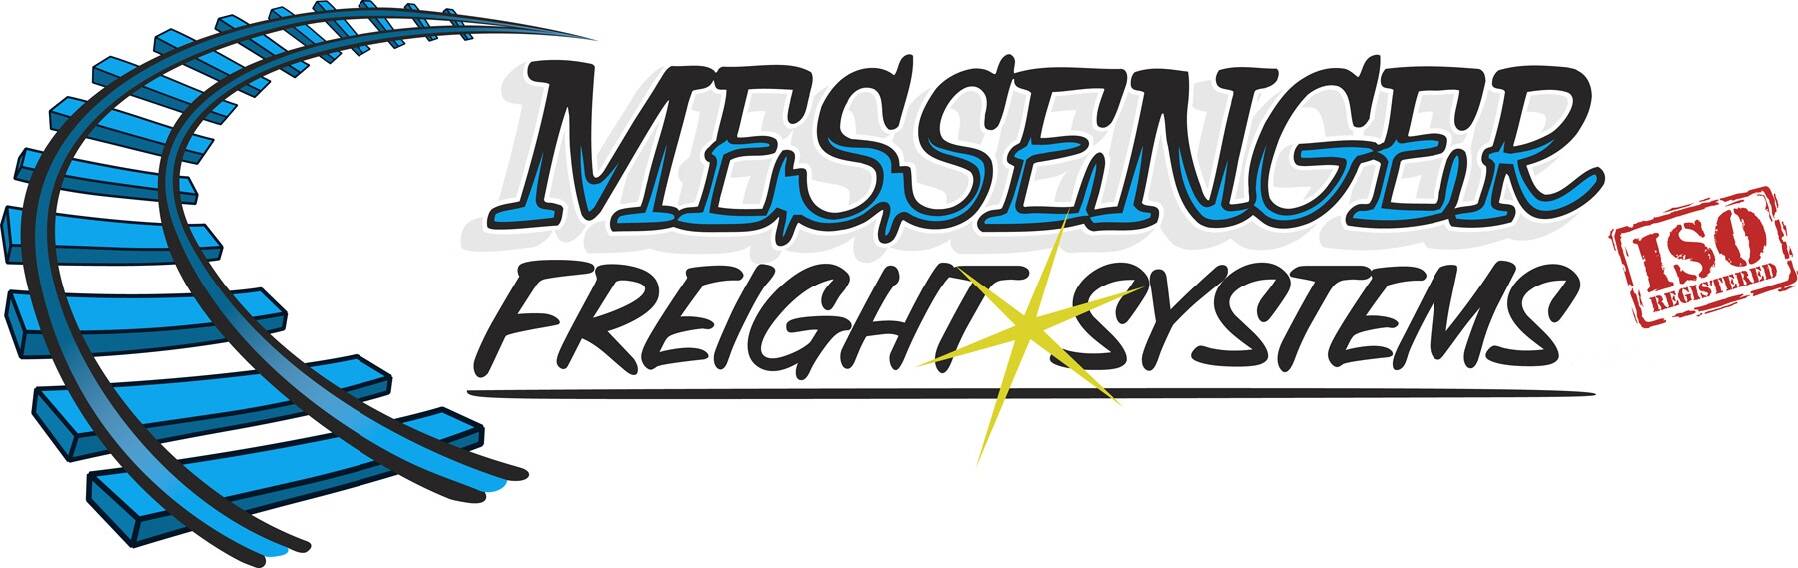 Messenger Freight Systems